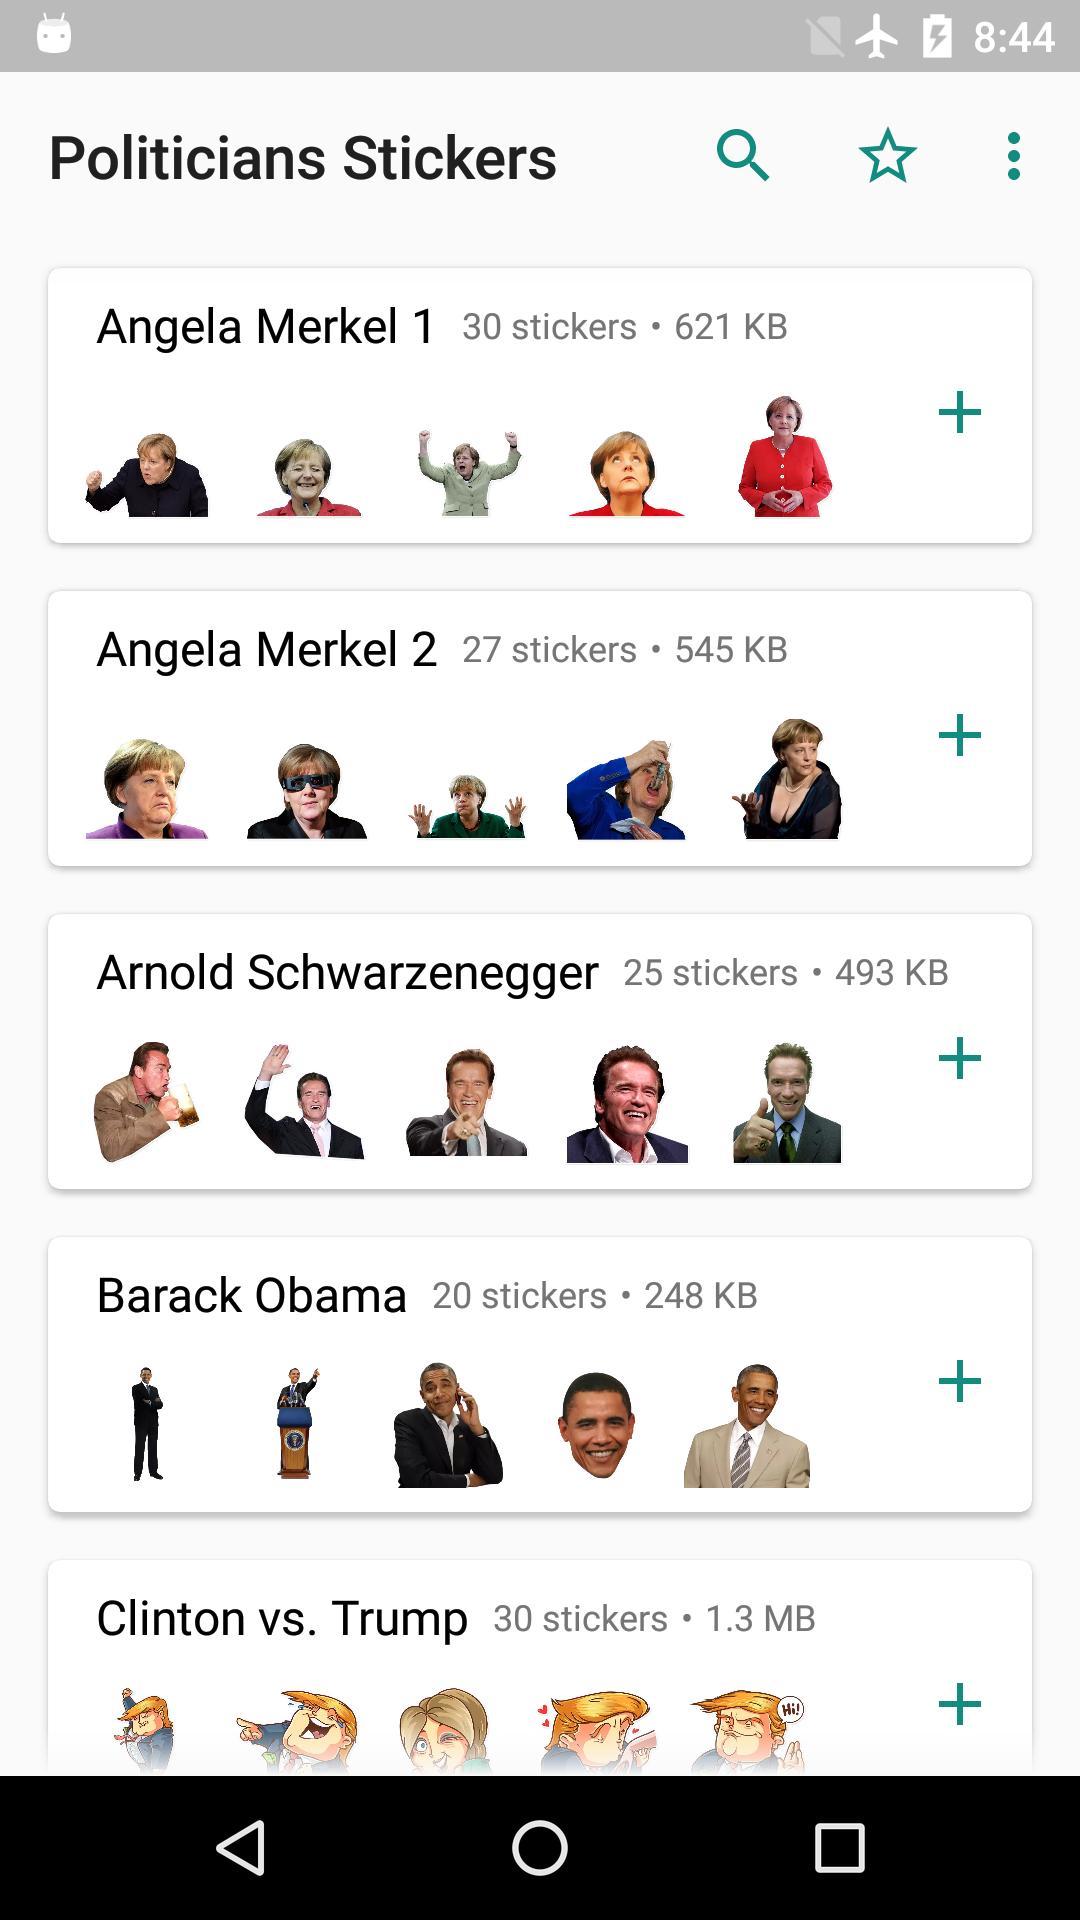 Politicians Stickers Xd83cxddfaxd83cxddf8 Wastickers Wastickerapps For Android